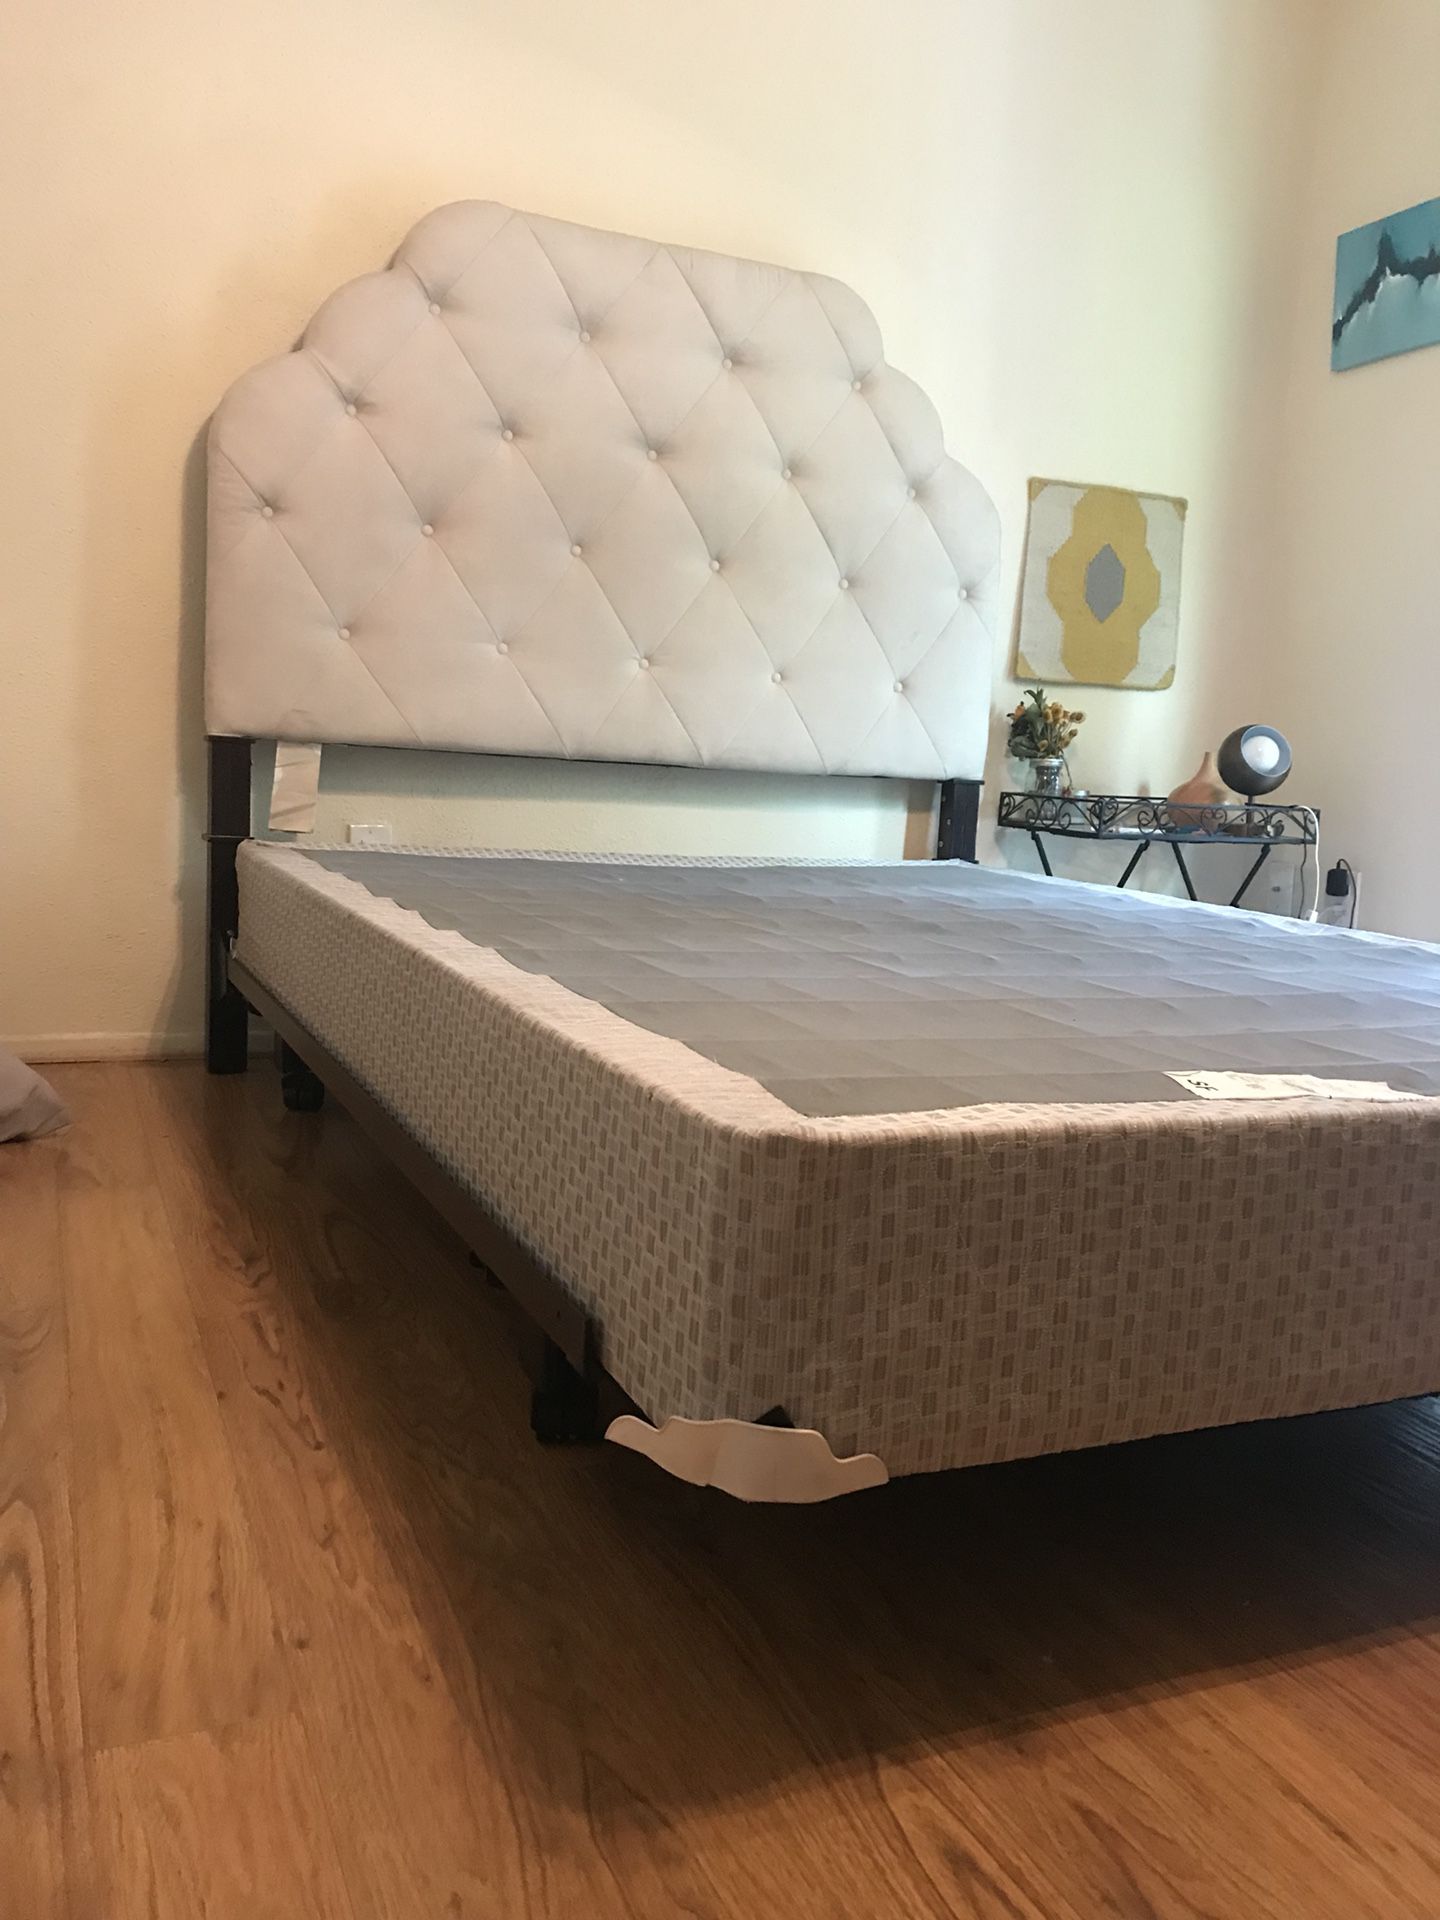 Full size bed frame with box spring